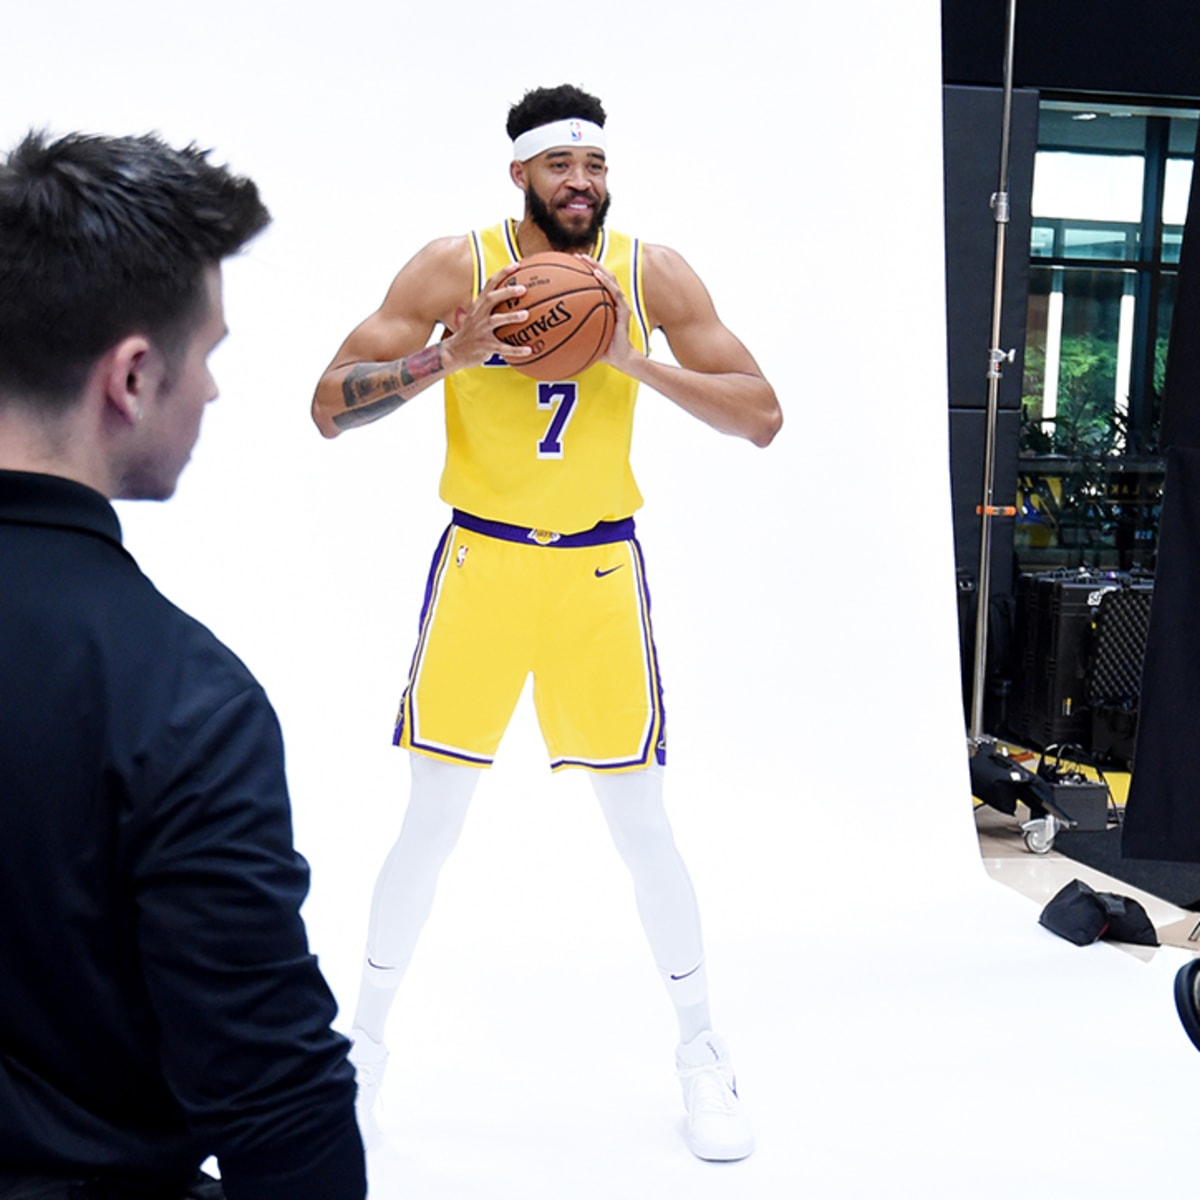 Nobody's fool, JaVale McGee battles for job with Warriors